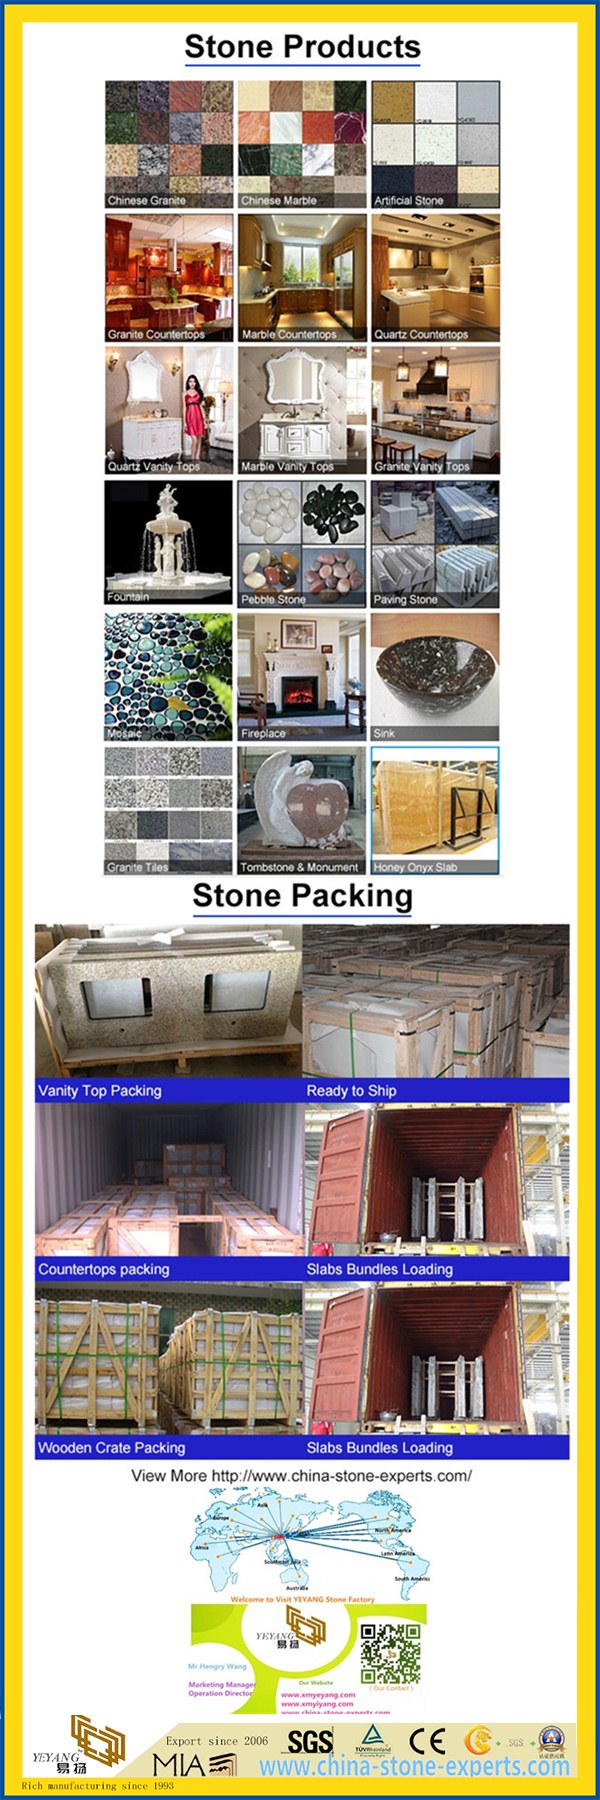 02 600 Yeyang Stone Products+Packing-02